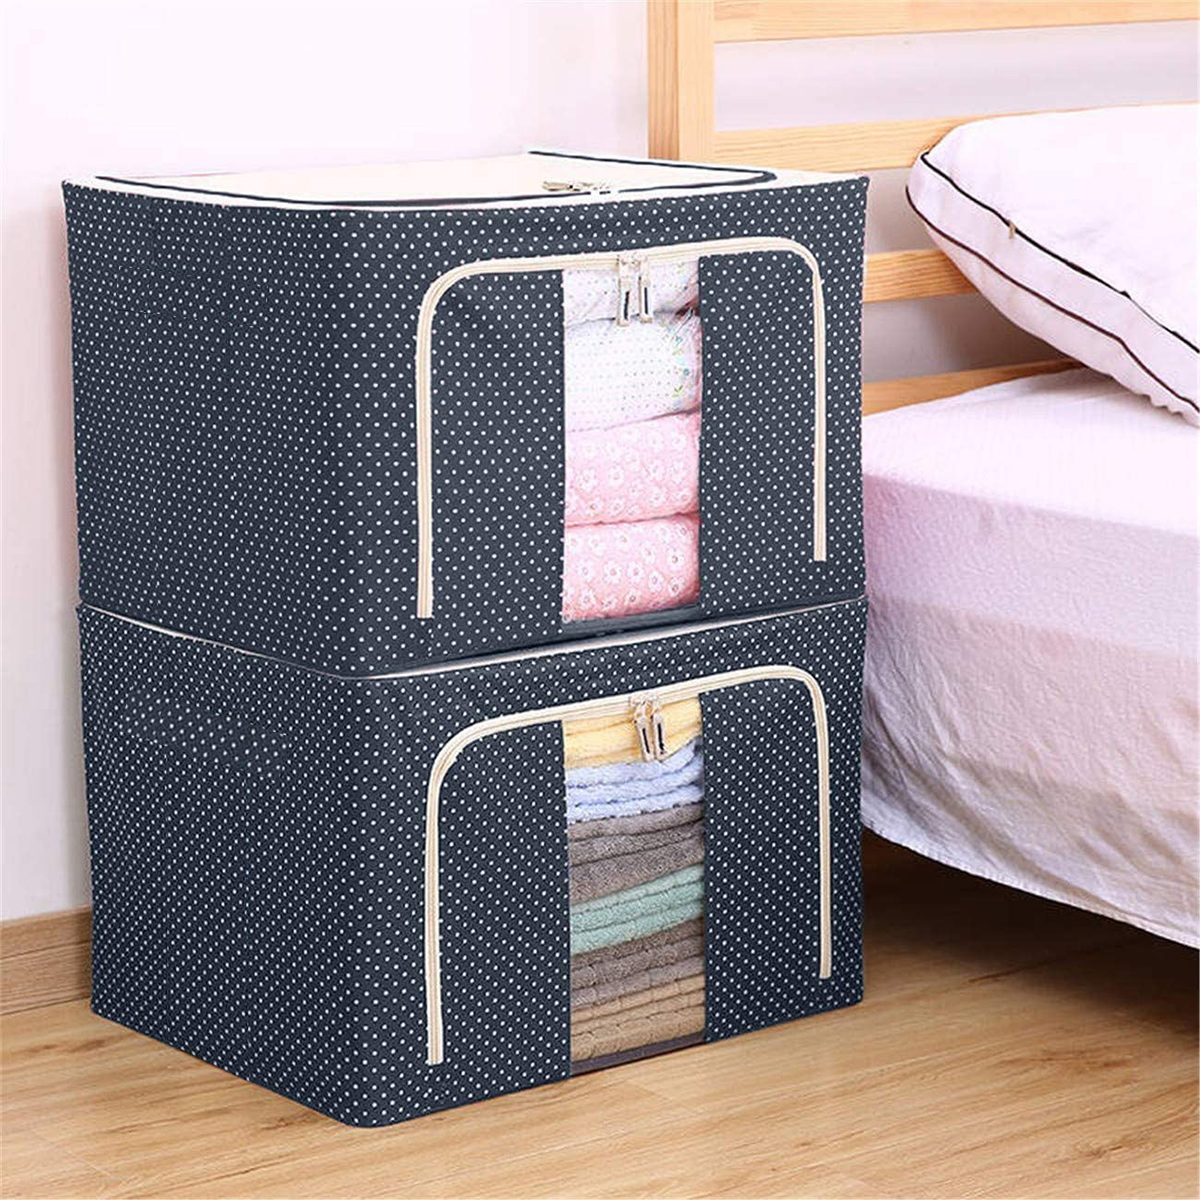 Storage-Bags-72L-Large-Blanket-Clothes-Organization-Containers-Bedding-Comforters-Foldable-Organizer-1914855-8